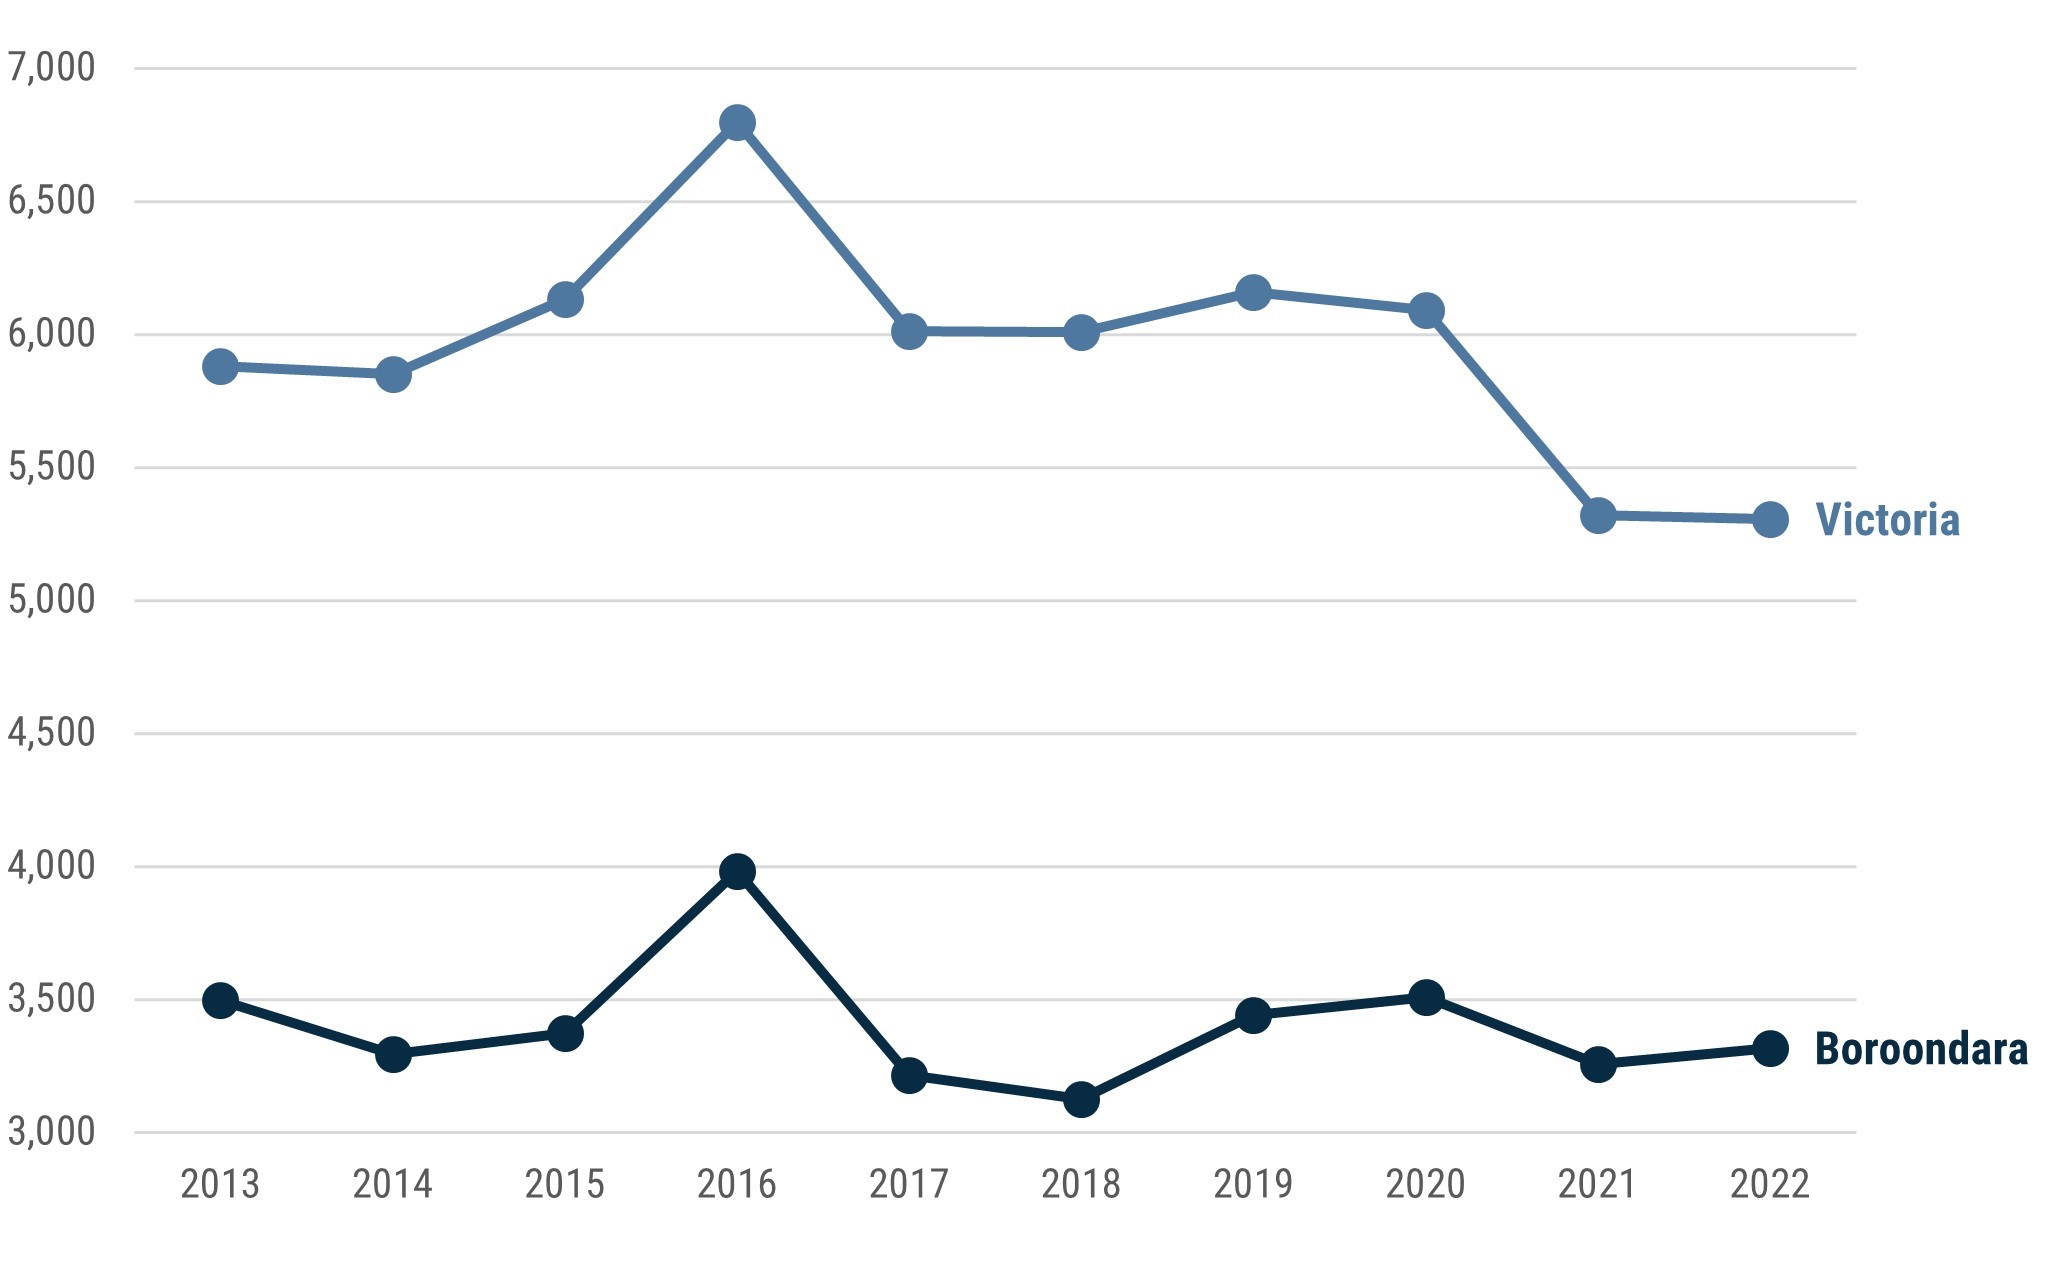 Figure 1 is a line chart which shows that between 2013 and 2022 the criminal incident rate in Boroondara has ranged from a low of 3125 in 2018 to a high of 3983 in 2016. The 2022 rate was 3319. Victoria's rate has been considerably higher than Boroondara's for the whole period, ranging from a low of 5307 in 2022 to a high of 6797 in 2016.